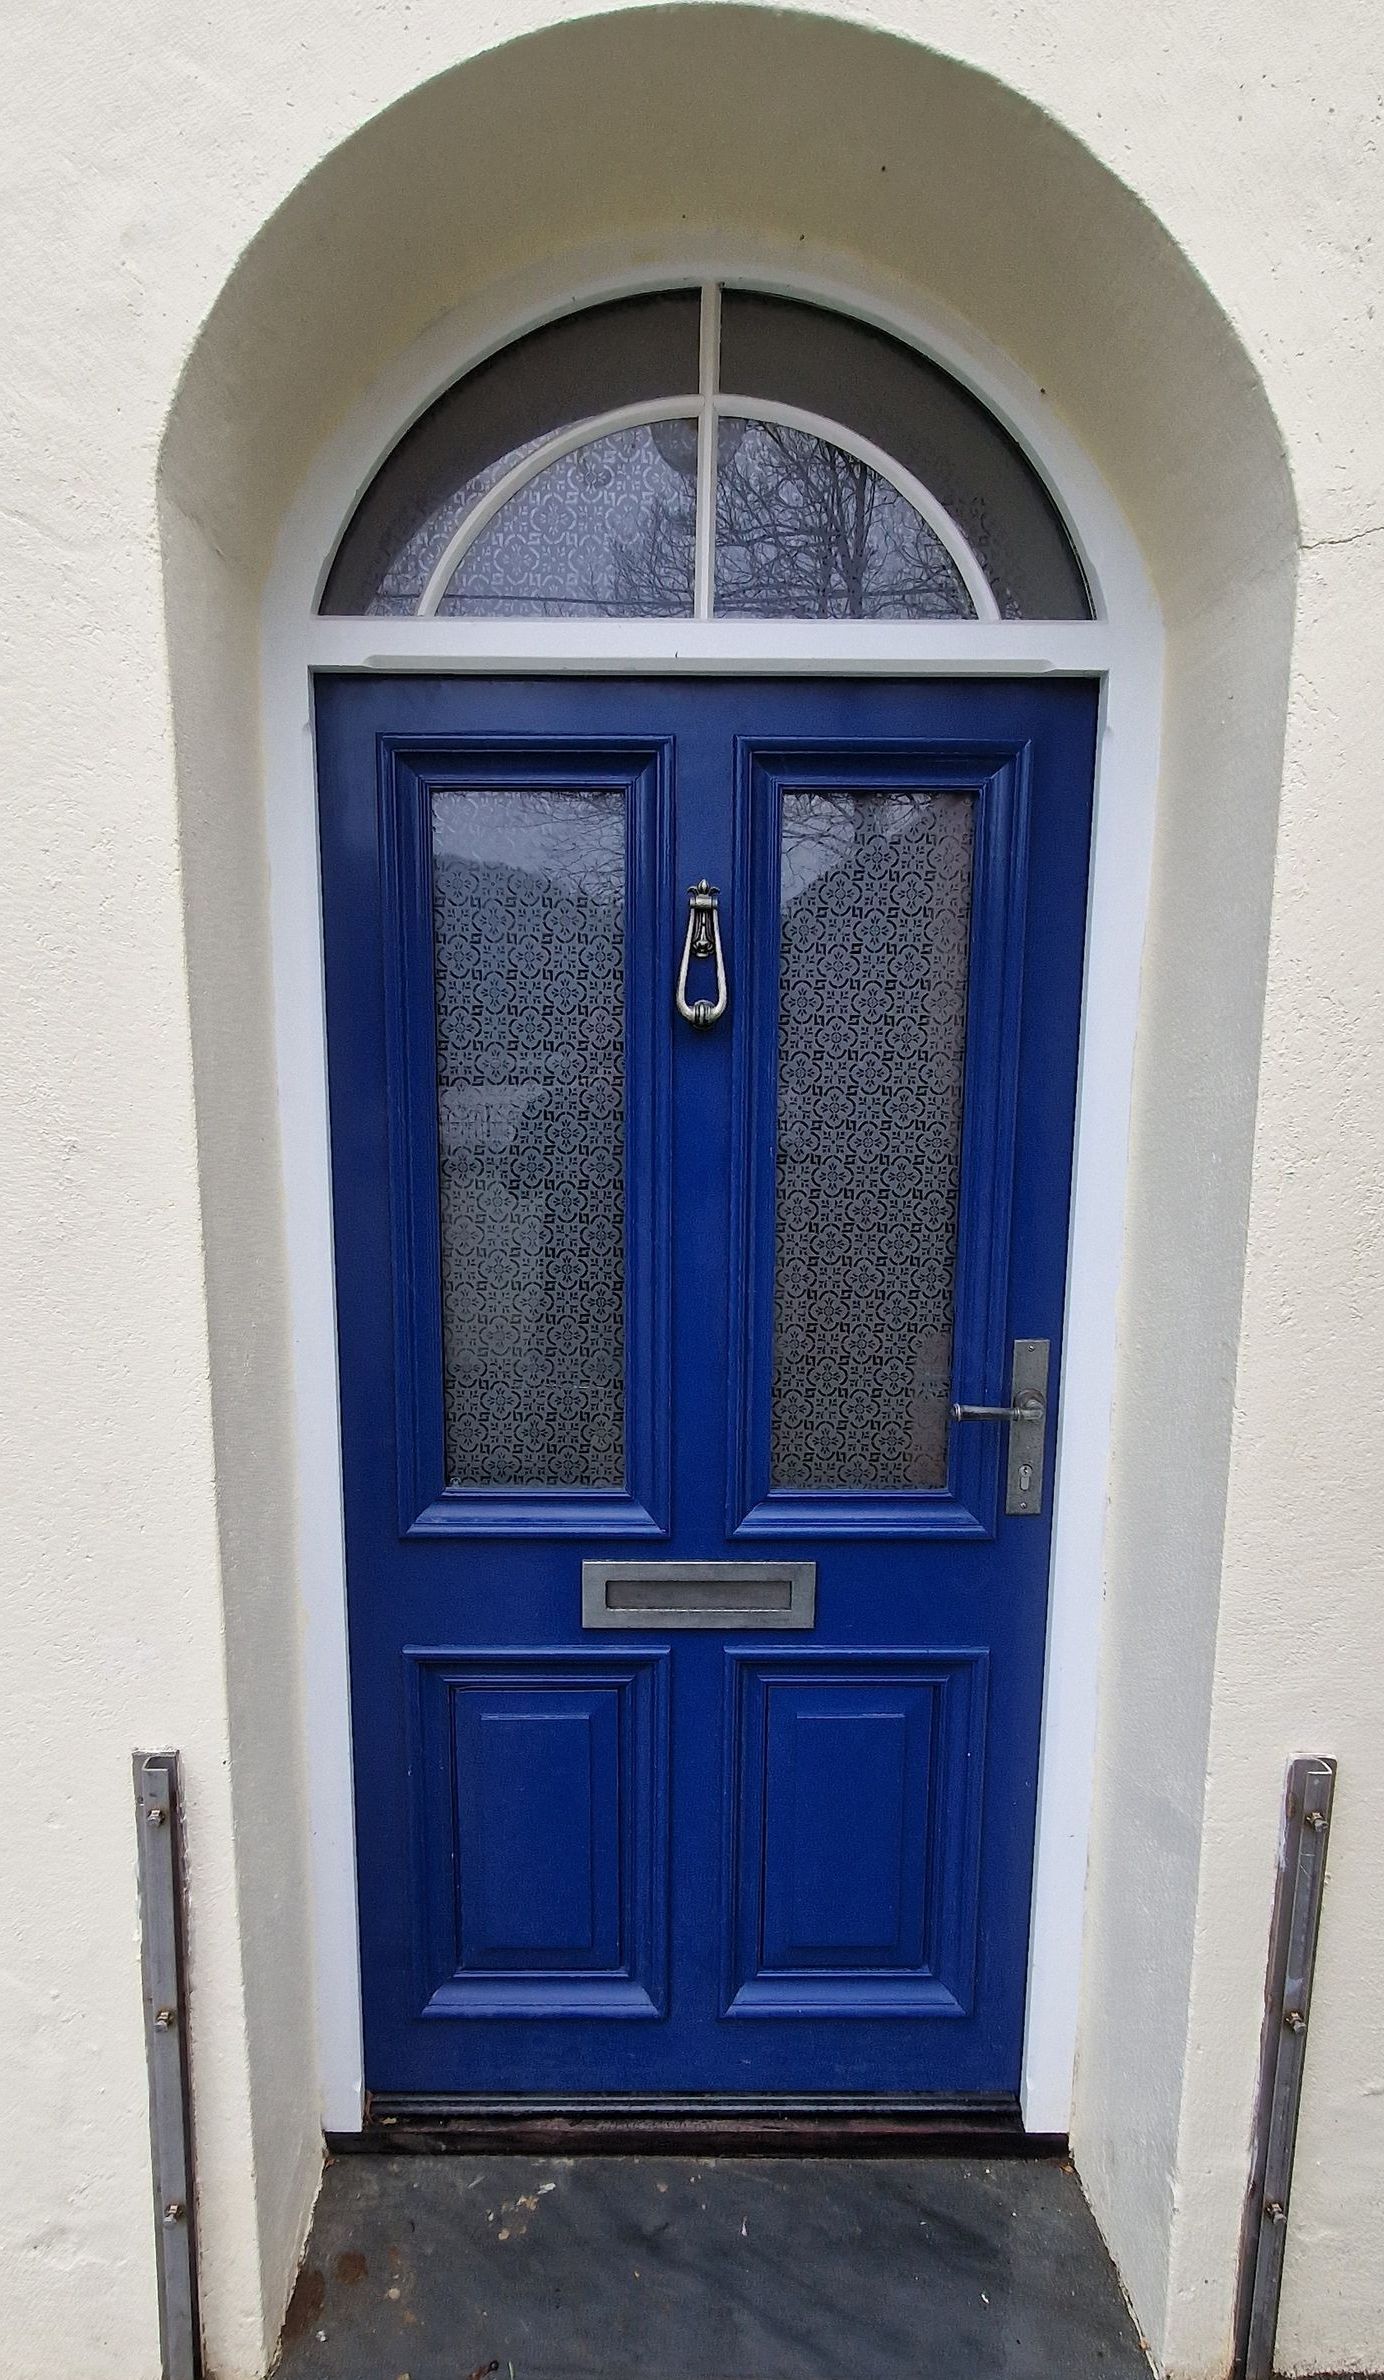 Accoya door with arched frame, raised bolection mouldings and glazed with Pilkington canterbury glass with curved duplex